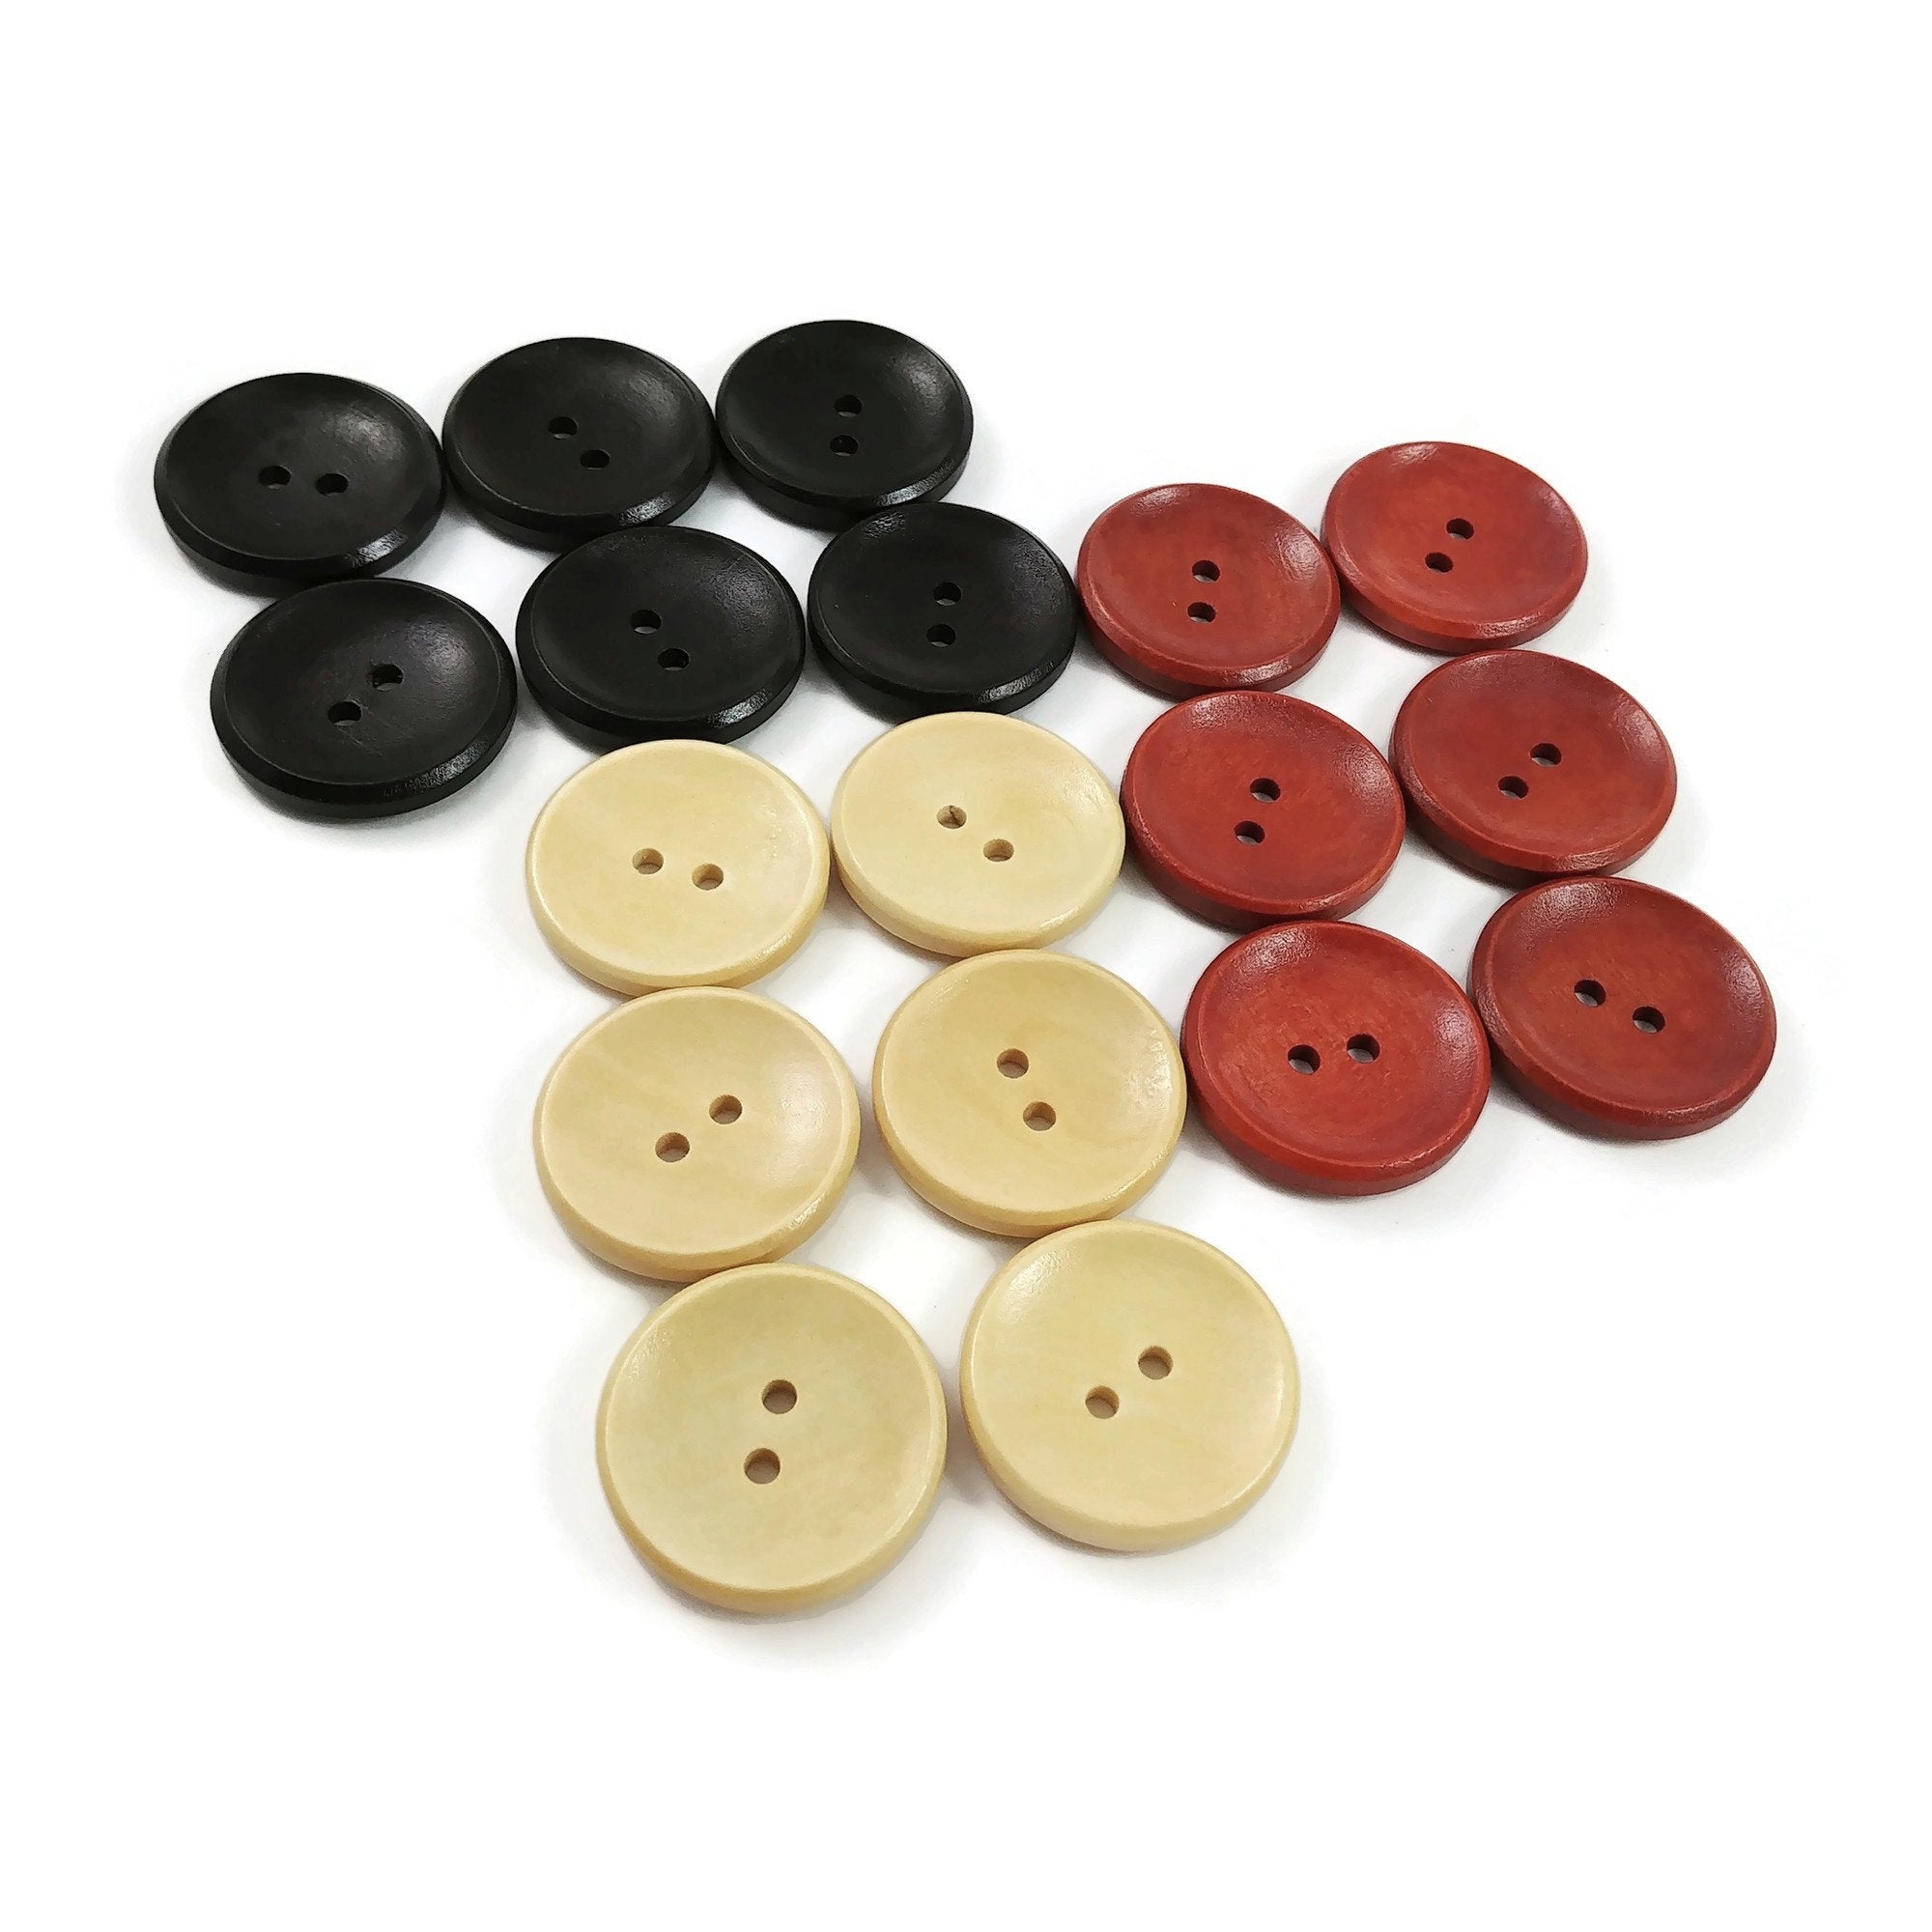 1 inch wooden buttons, 6 sewing buttons, 25mm natural wood button, Dark brown, brown, copper or natural